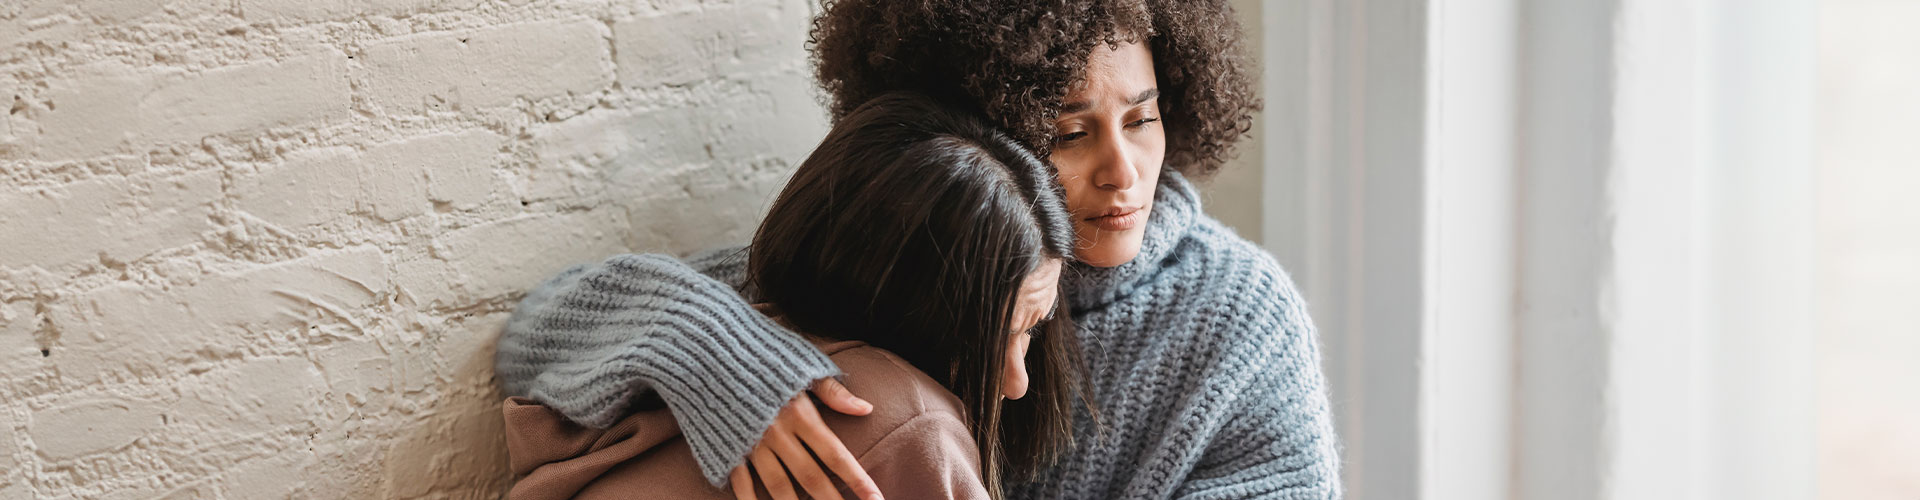 Photo of a woman hugging and supporting other women. You can feel peace after getting grief therapy in West County, MO. You can get help with the grieving process in online therapy in Missouri. Marble Wellness also offers grief counseling in-person in St. Louis, MO.